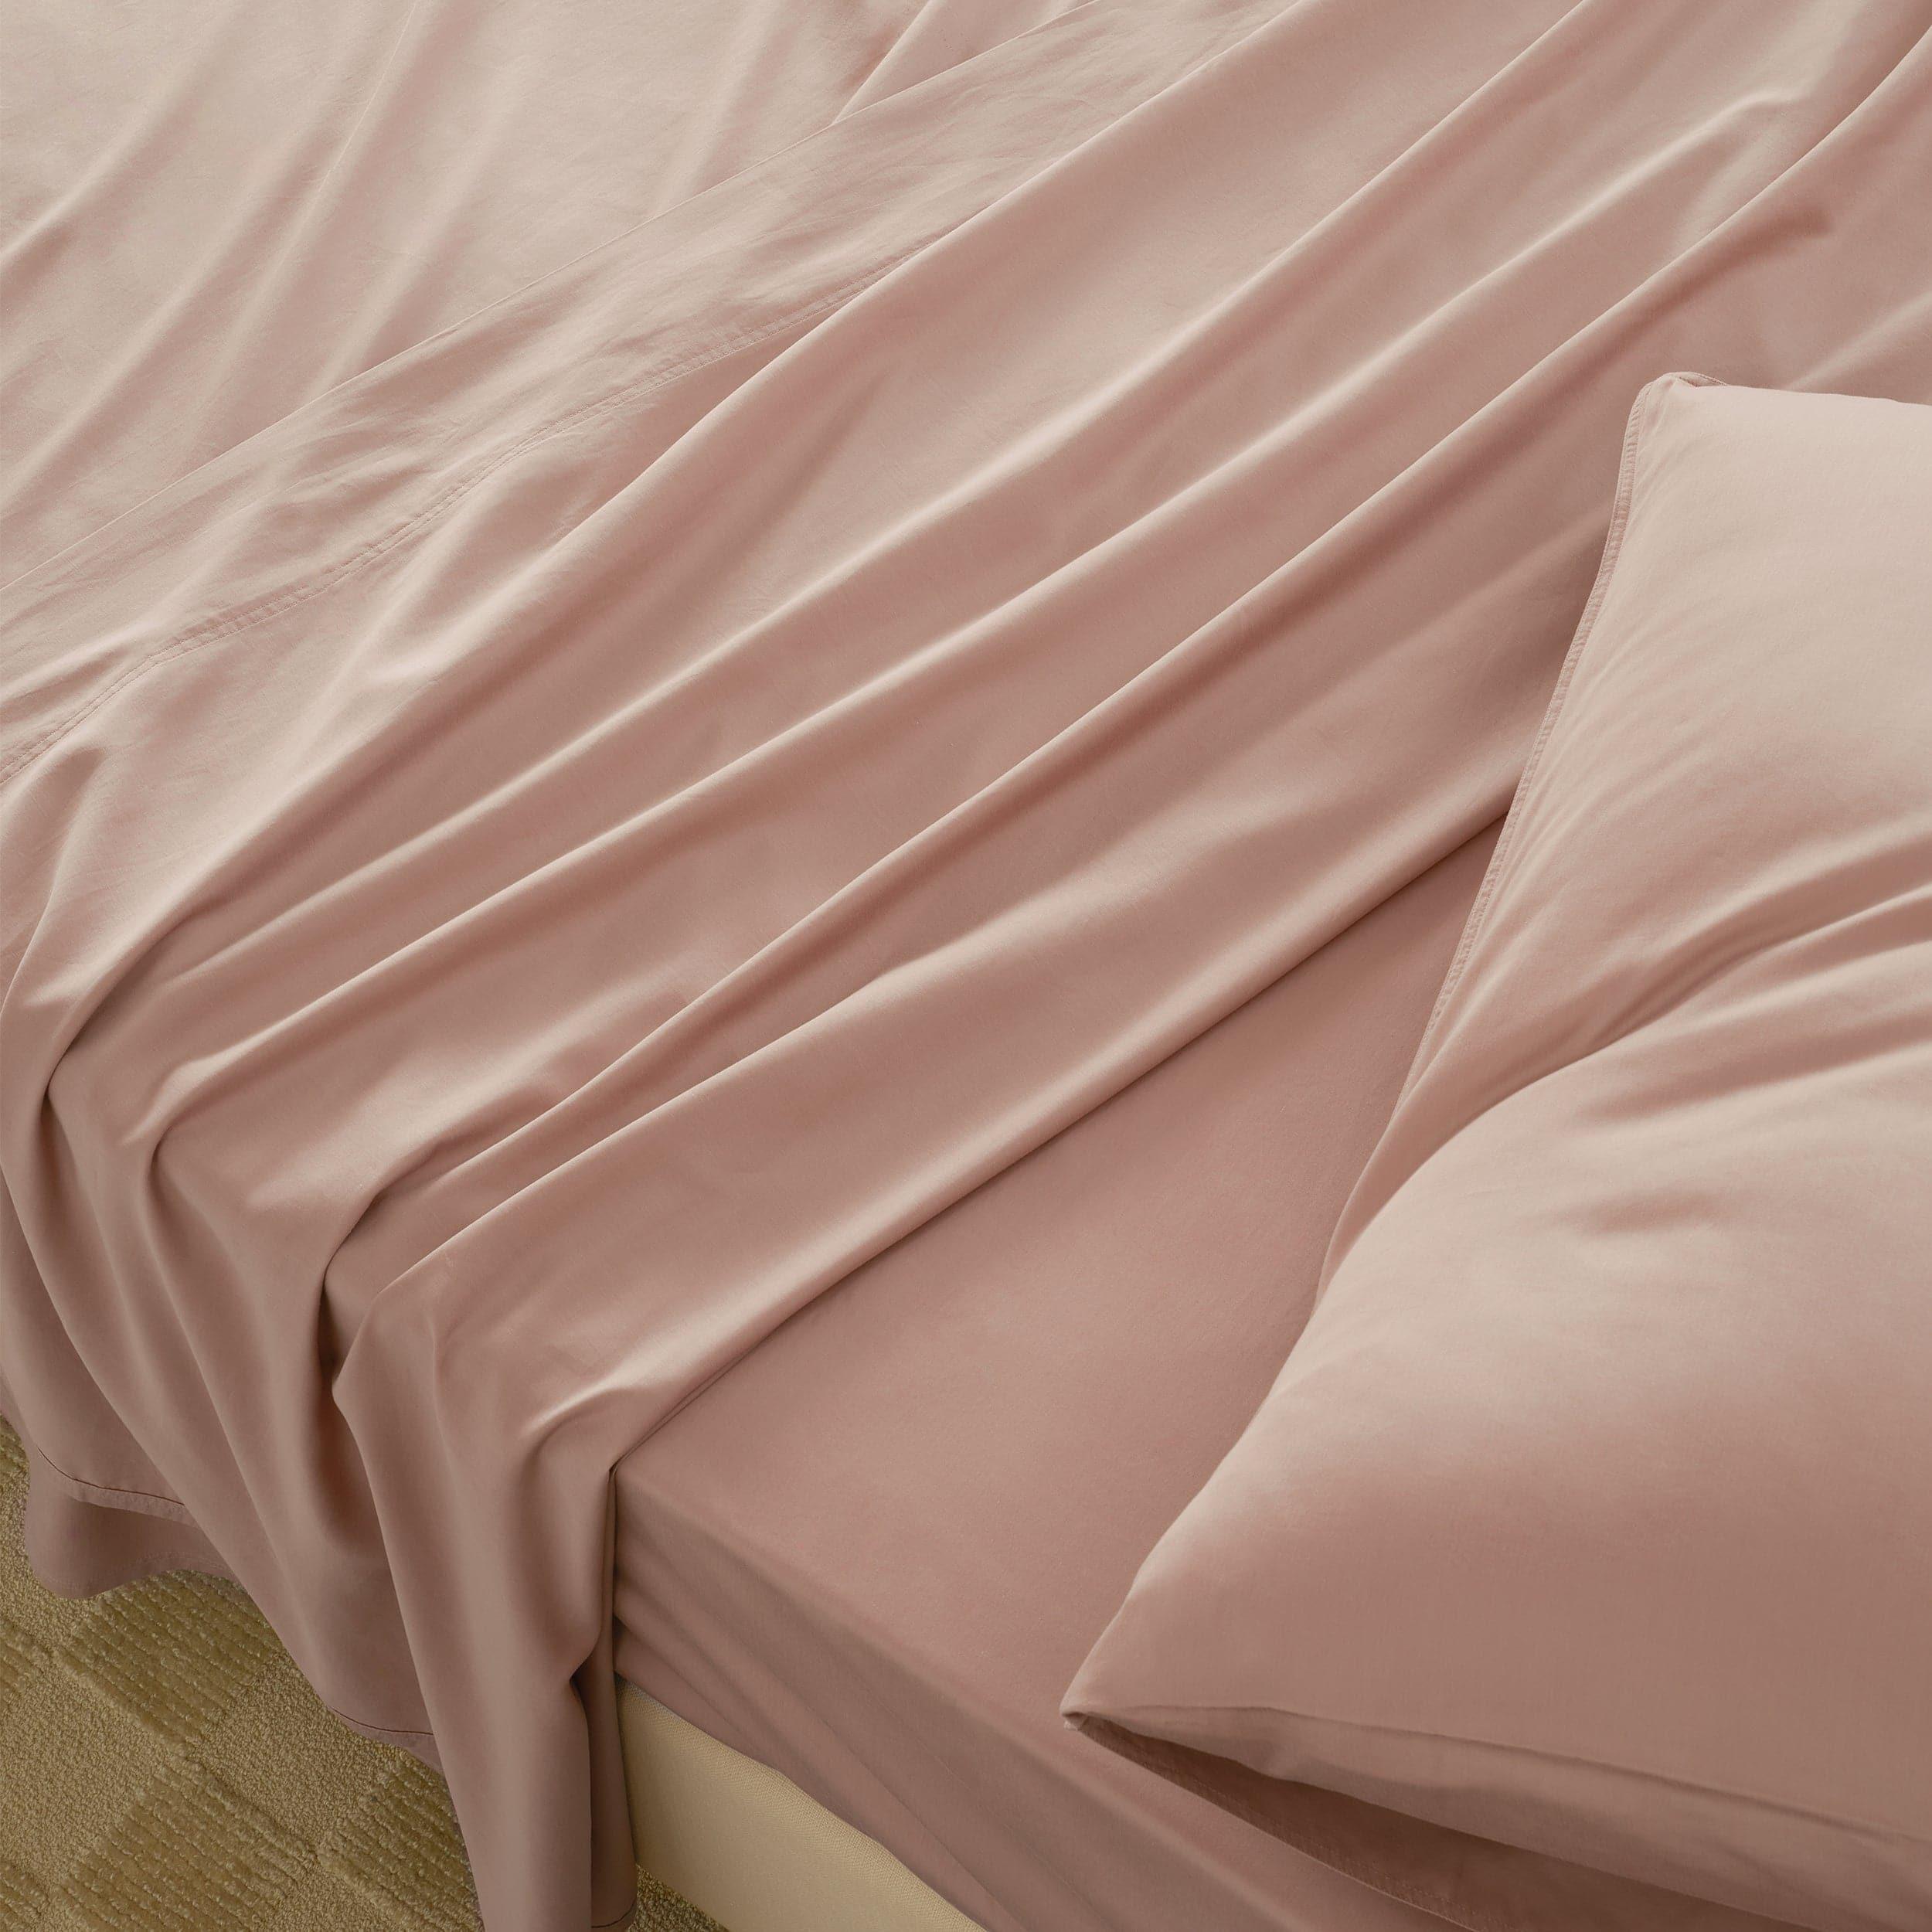 Experience the luxury of a high-quality queen size sheet set.